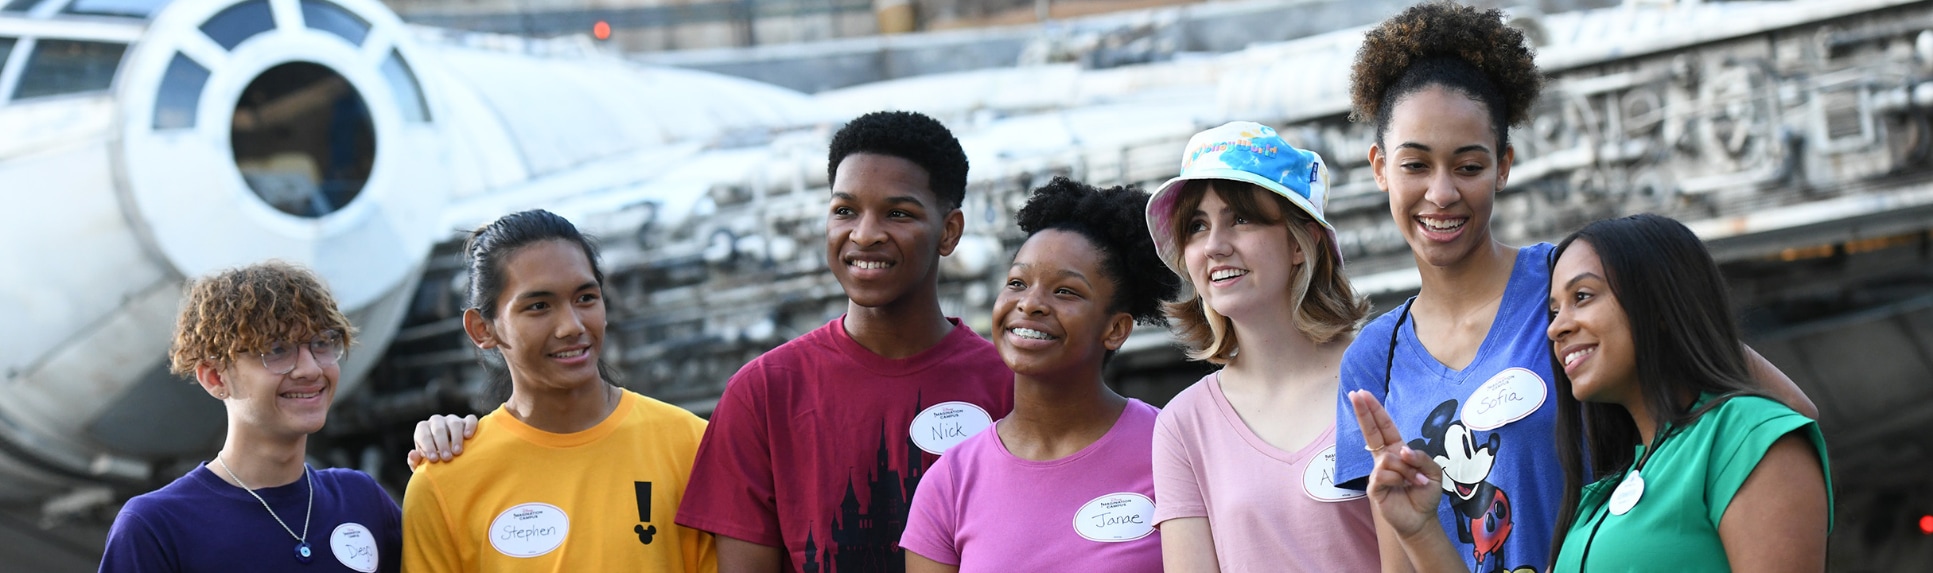 7 Disney Imagination Campus students stand in front of the Millennium Falcon in Star Wars Galaxy’s Edge